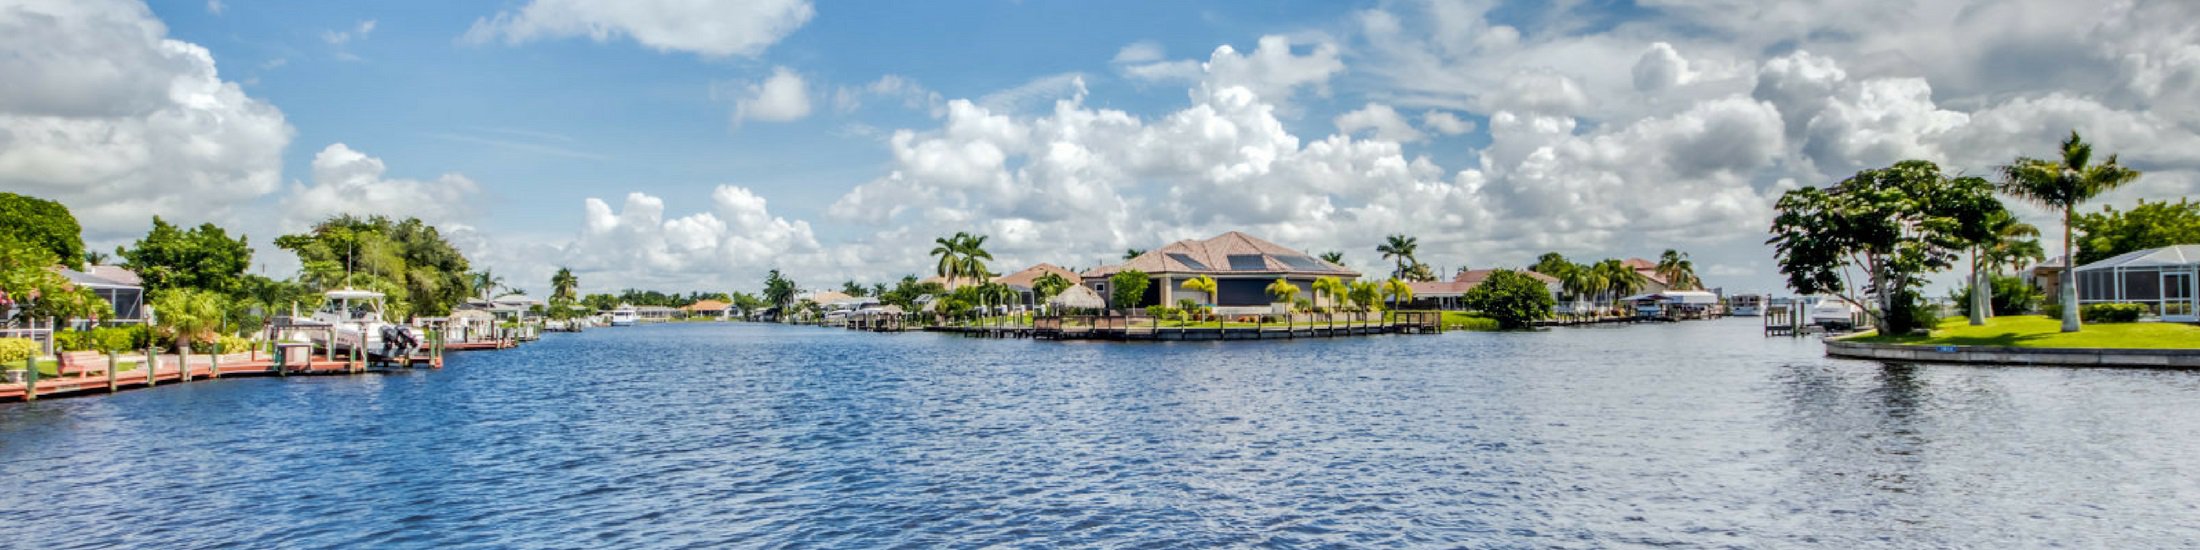 Sunset Pointe Homes for Sale